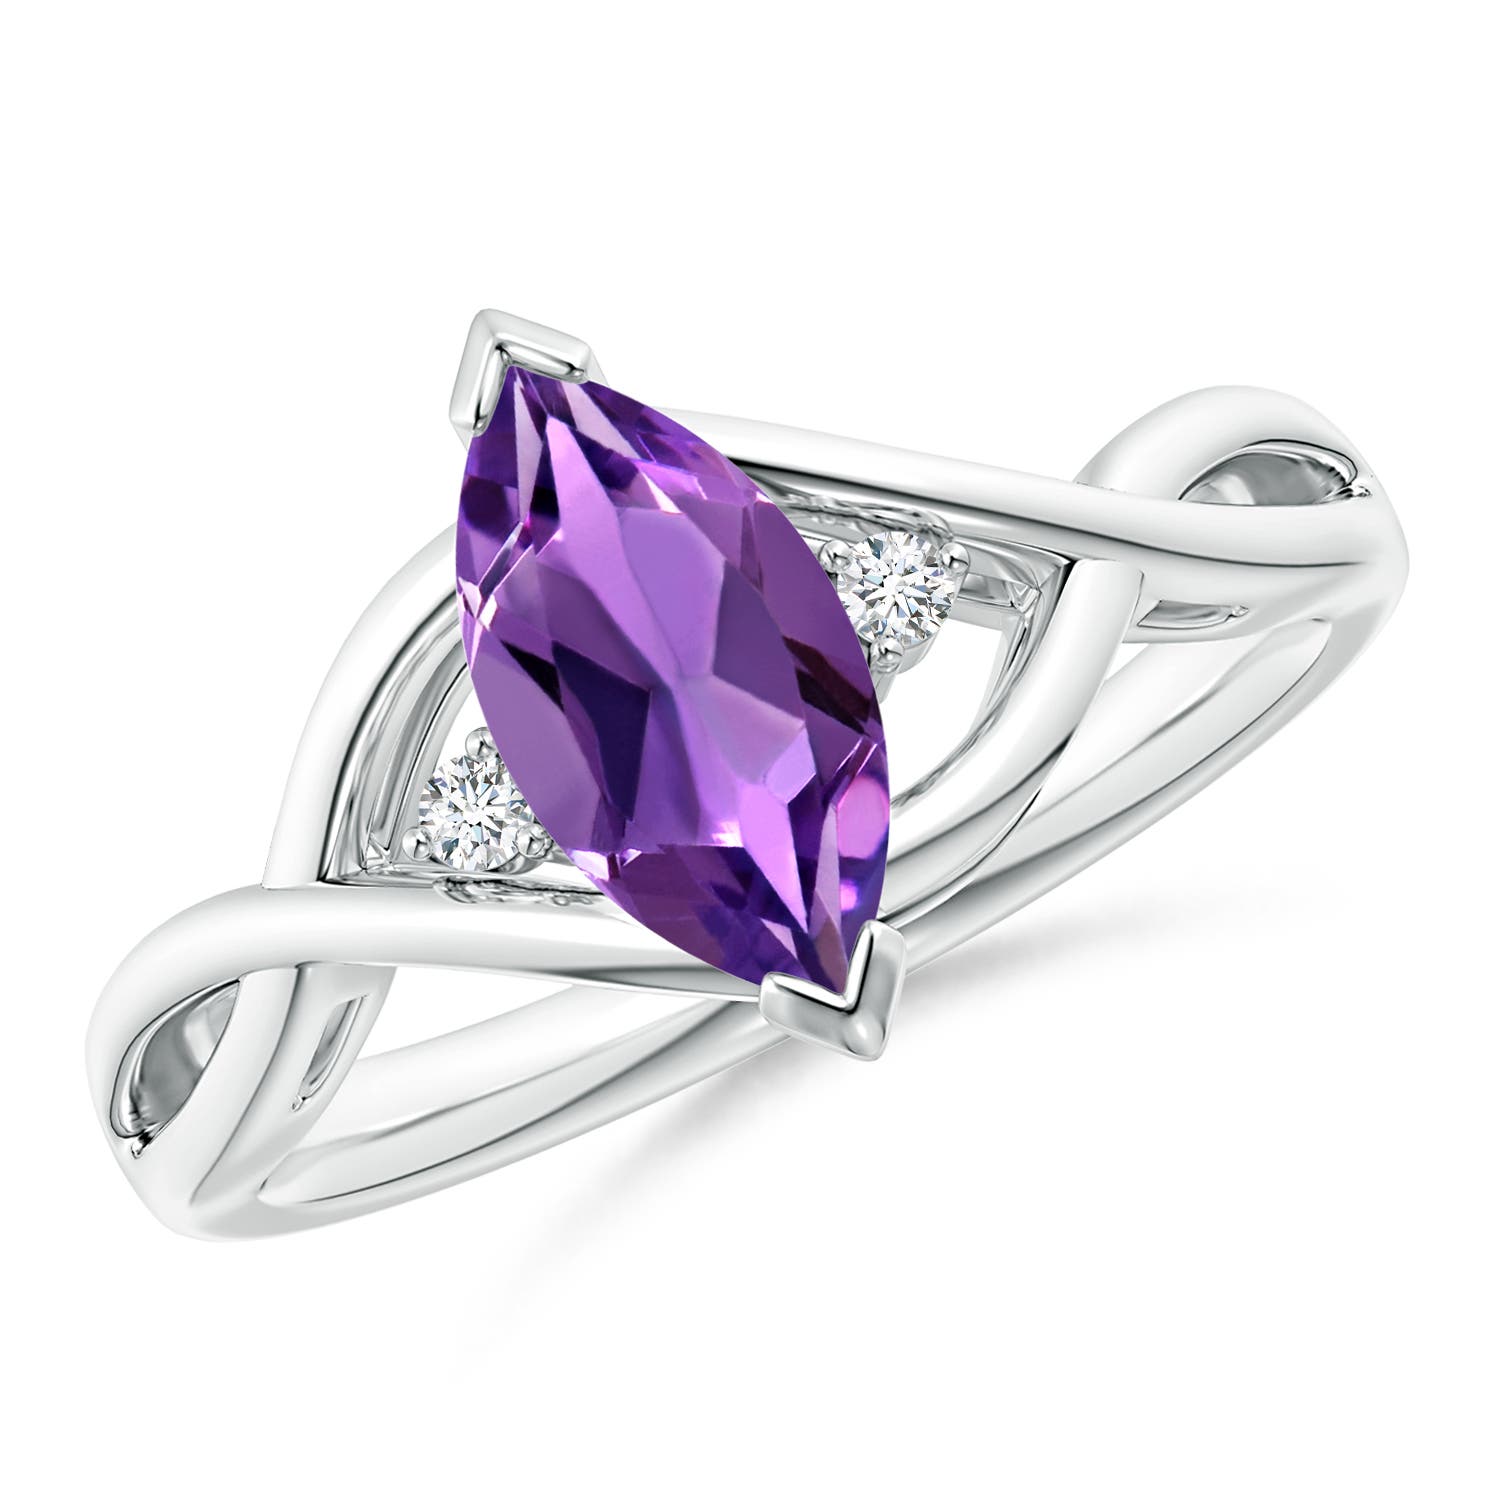 AAA - Amethyst / 0.98 CT / 14 KT White Gold